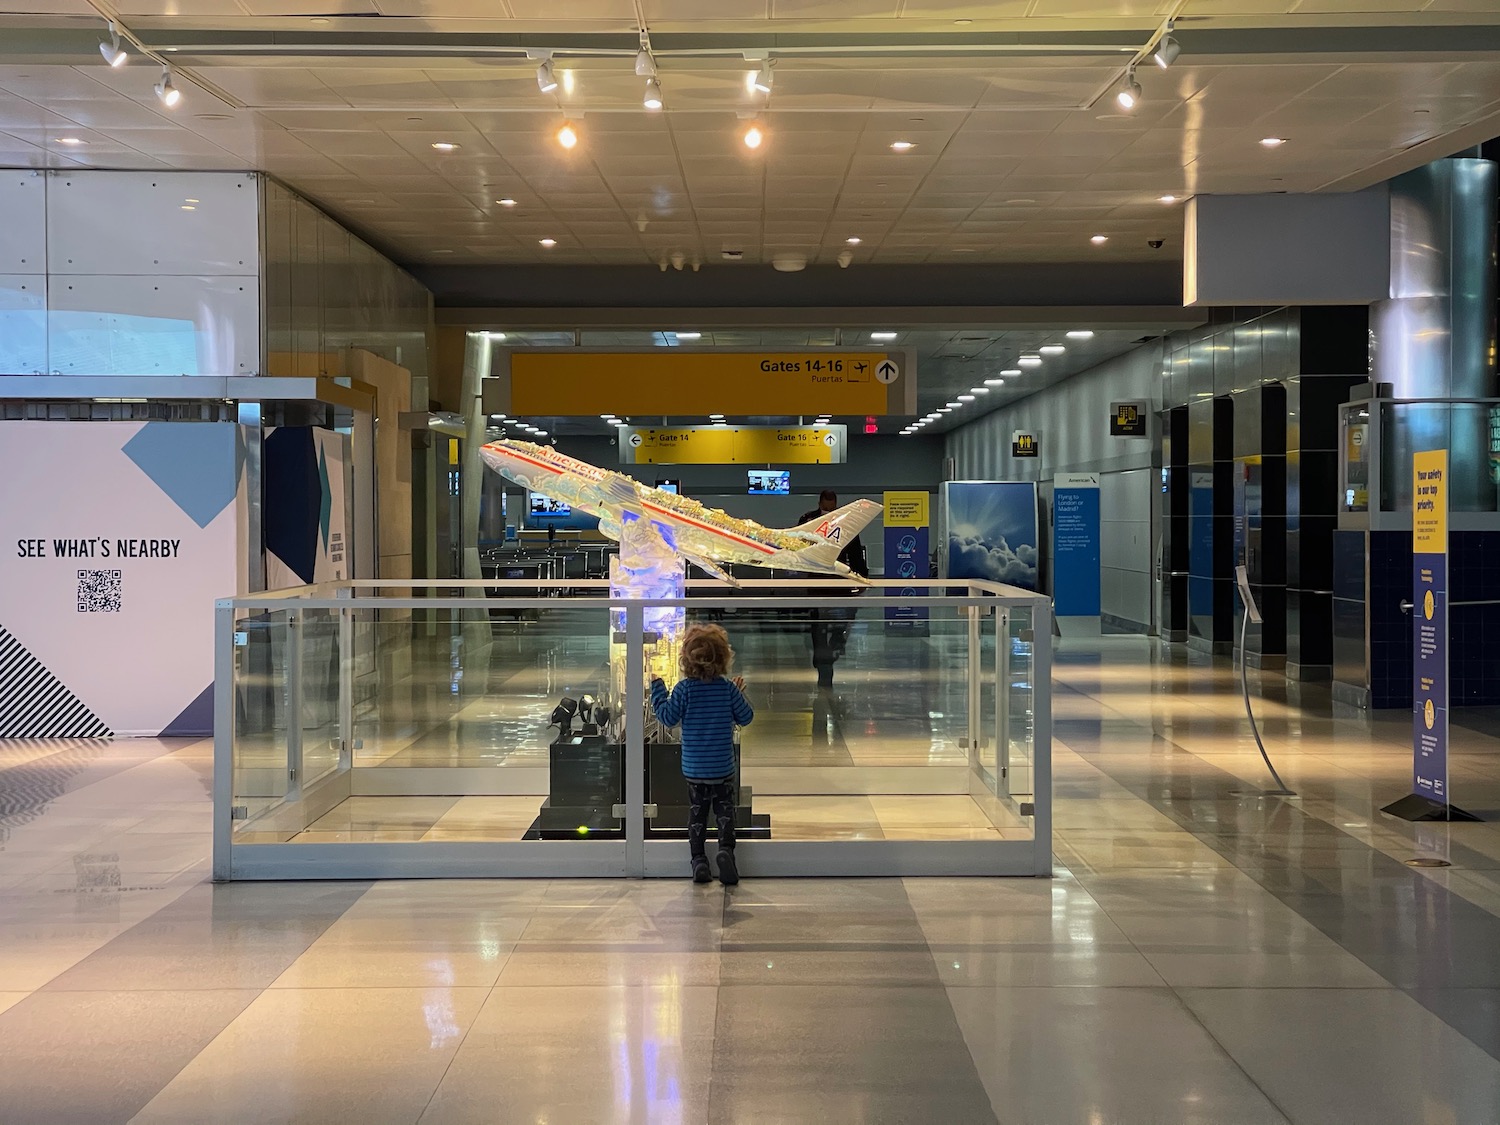 a child standing in front of a model of a plane